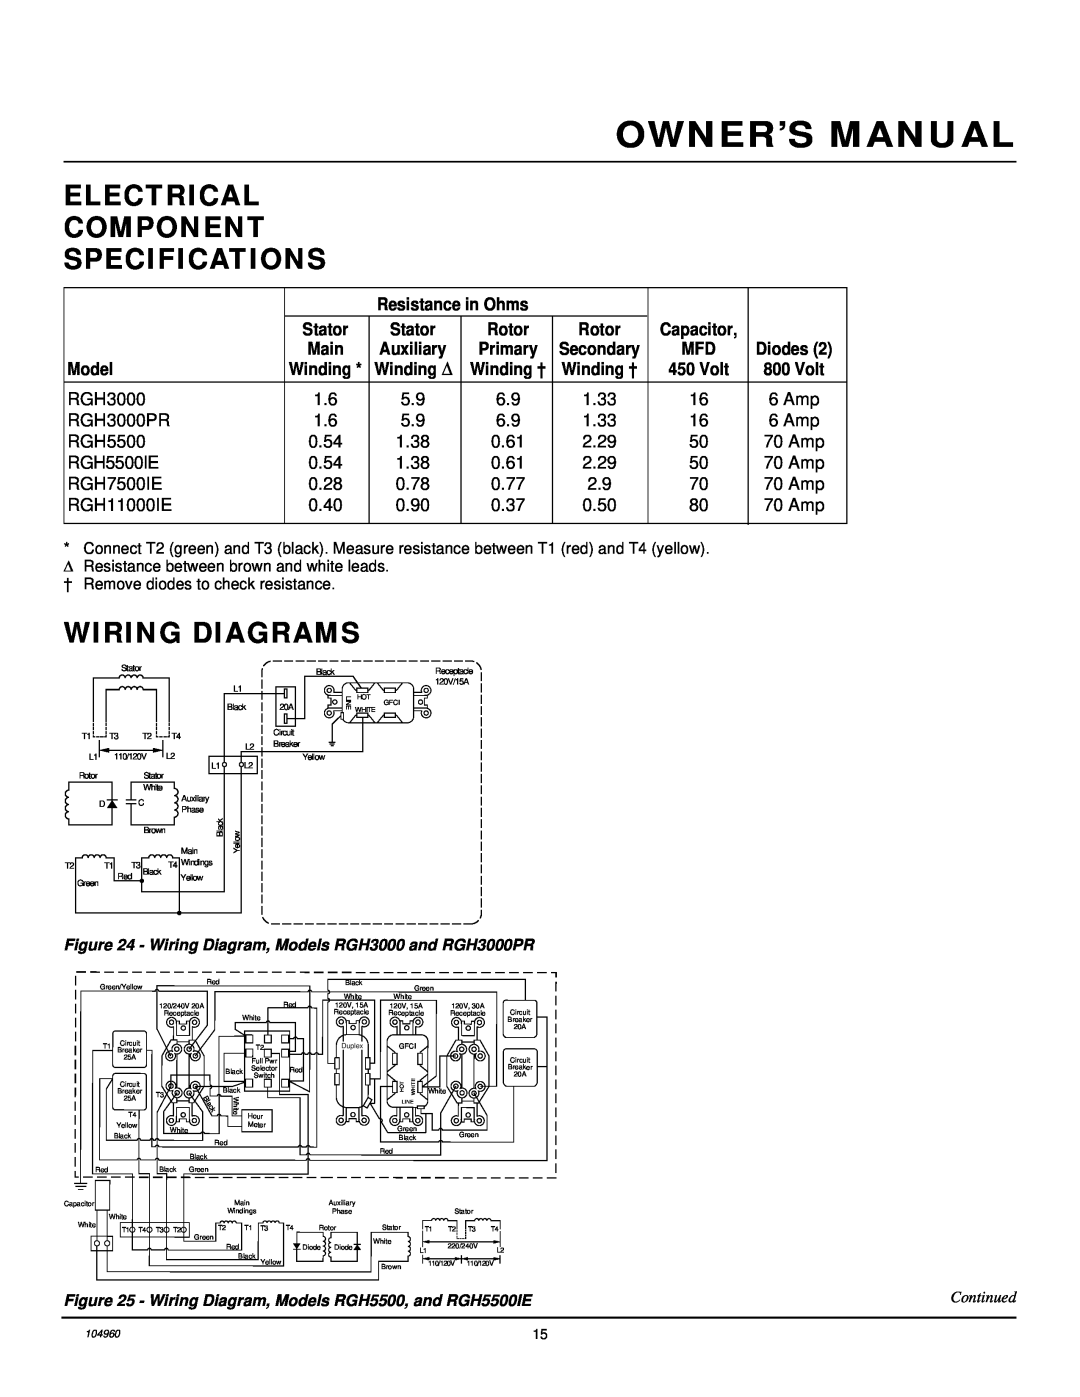 Desa Rgh3000, Rgh3000pr, Rgh5500, Rgh5500ie, Rgh7500ie, Rgh11000ie Electrical Component Specifications, Wiring Diagrams 